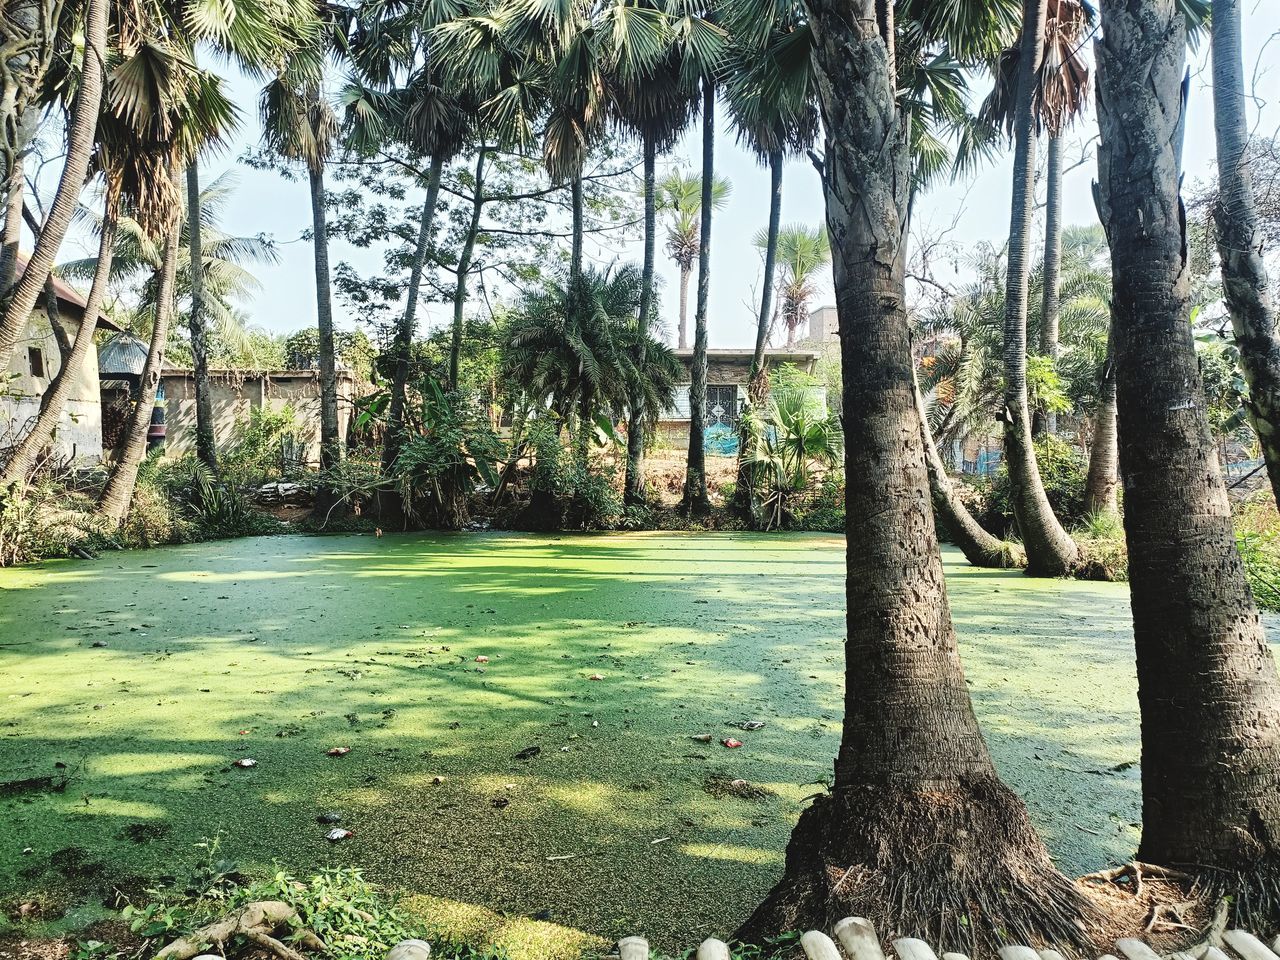 tree, plant, nature, tree trunk, trunk, tranquility, growth, day, beauty in nature, palm tree, no people, tropical climate, green, land, sunlight, water, tranquil scene, scenics - nature, outdoors, garden, grass, environment, idyllic, sky, non-urban scene, park